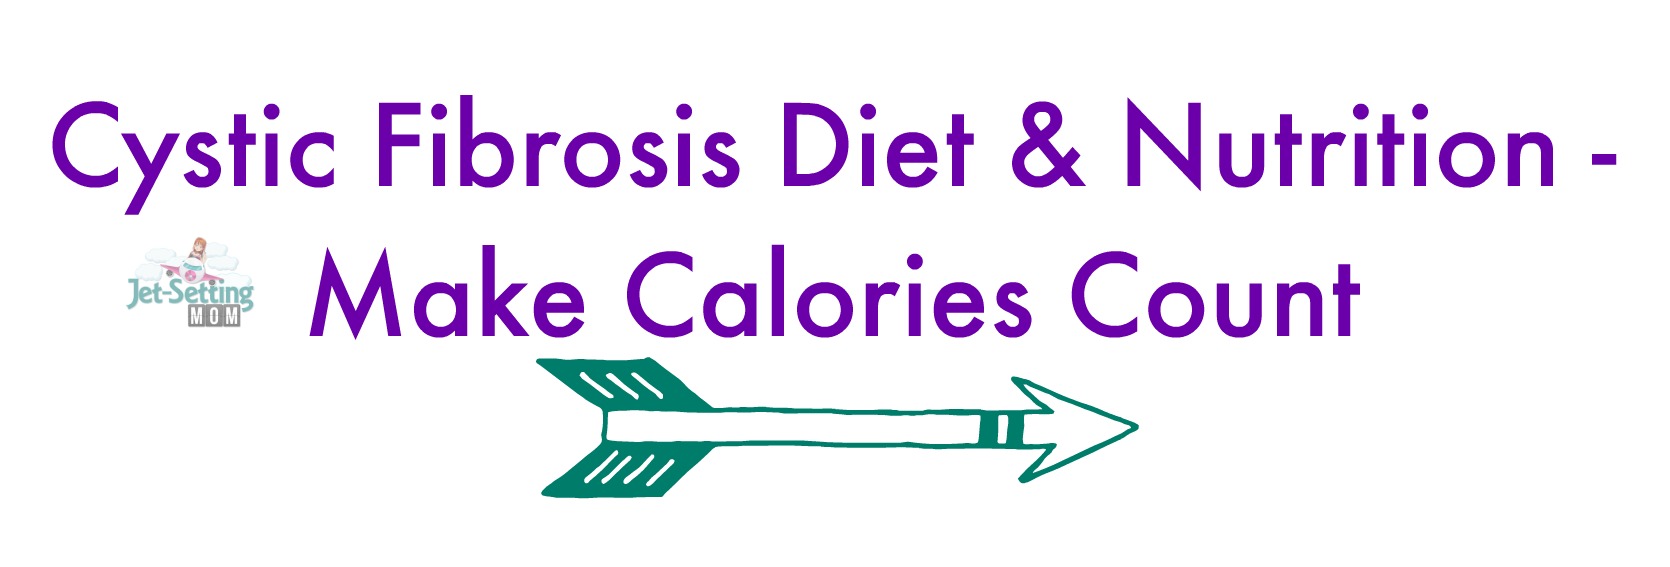 Cystic Fibrosis diet and nutrition